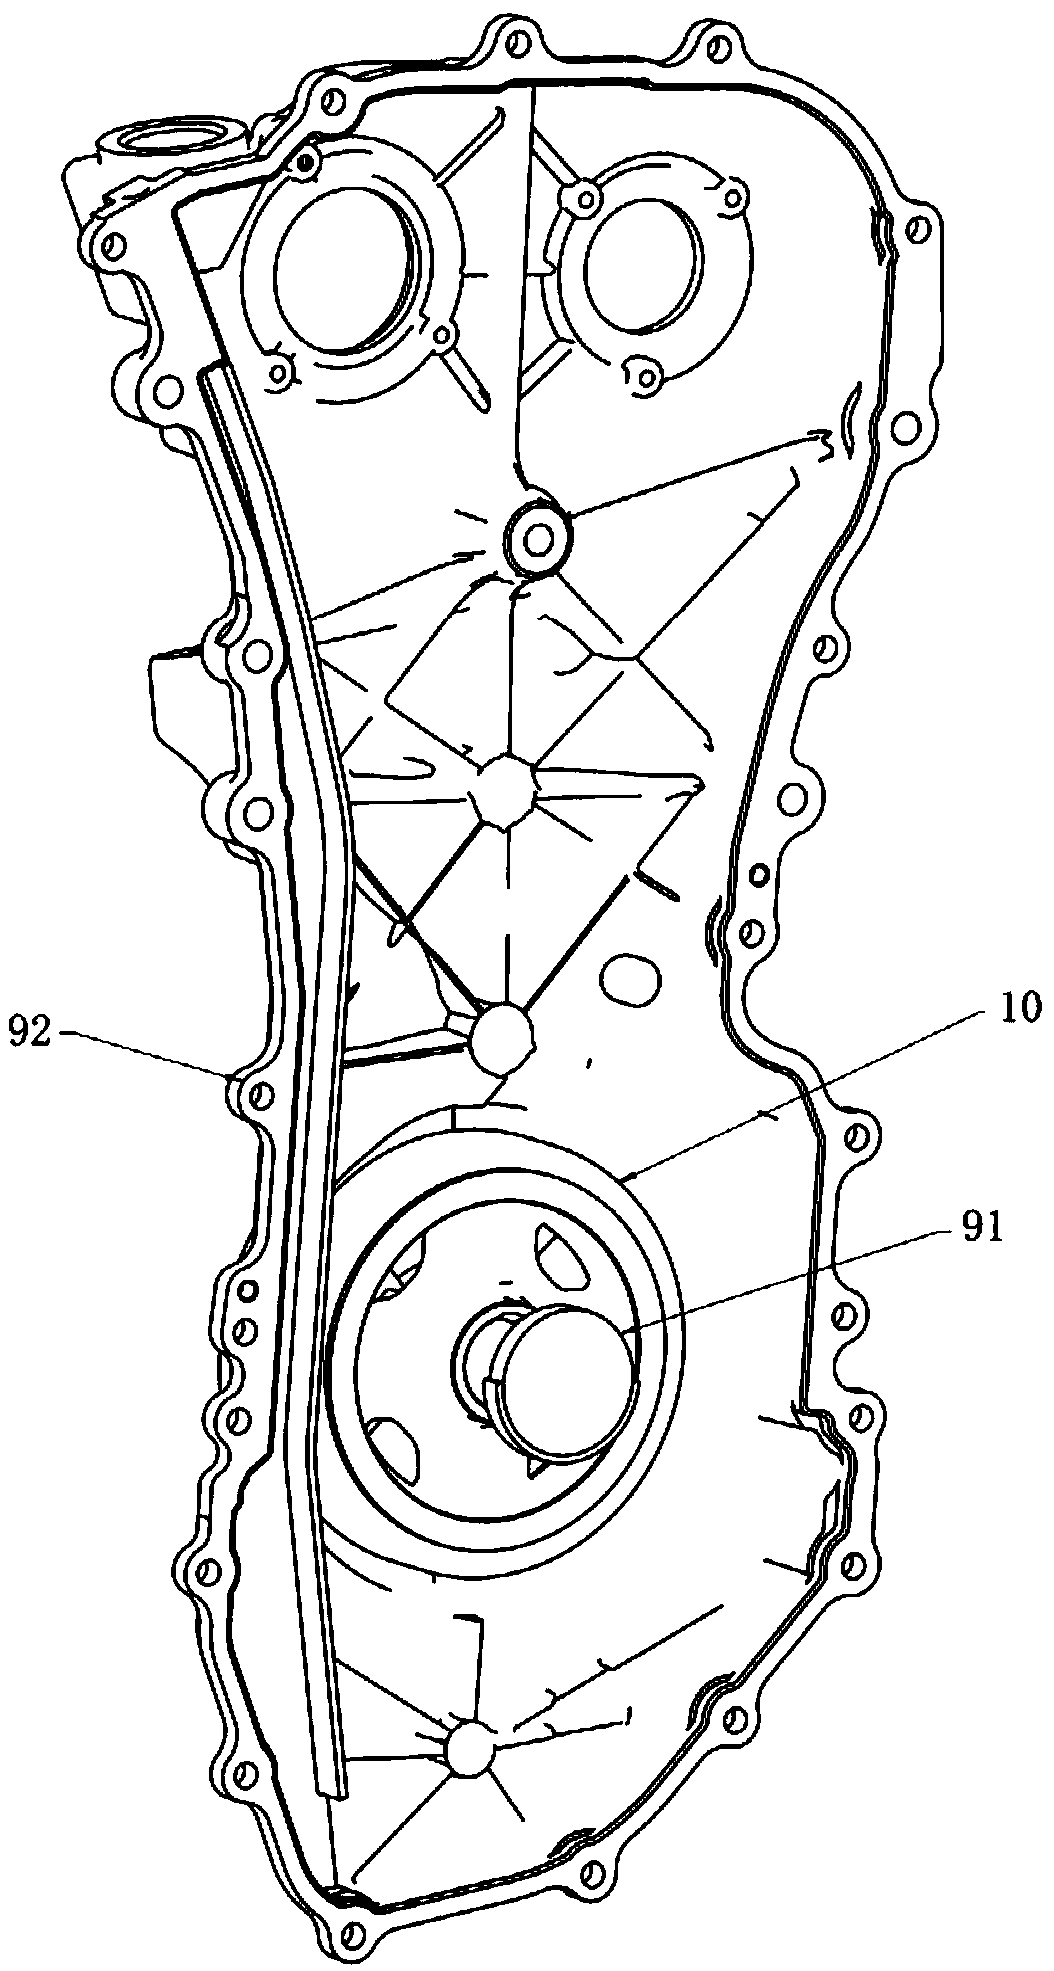 Crankshaft damping wheel, mounting structure thereof, engine and vehicle